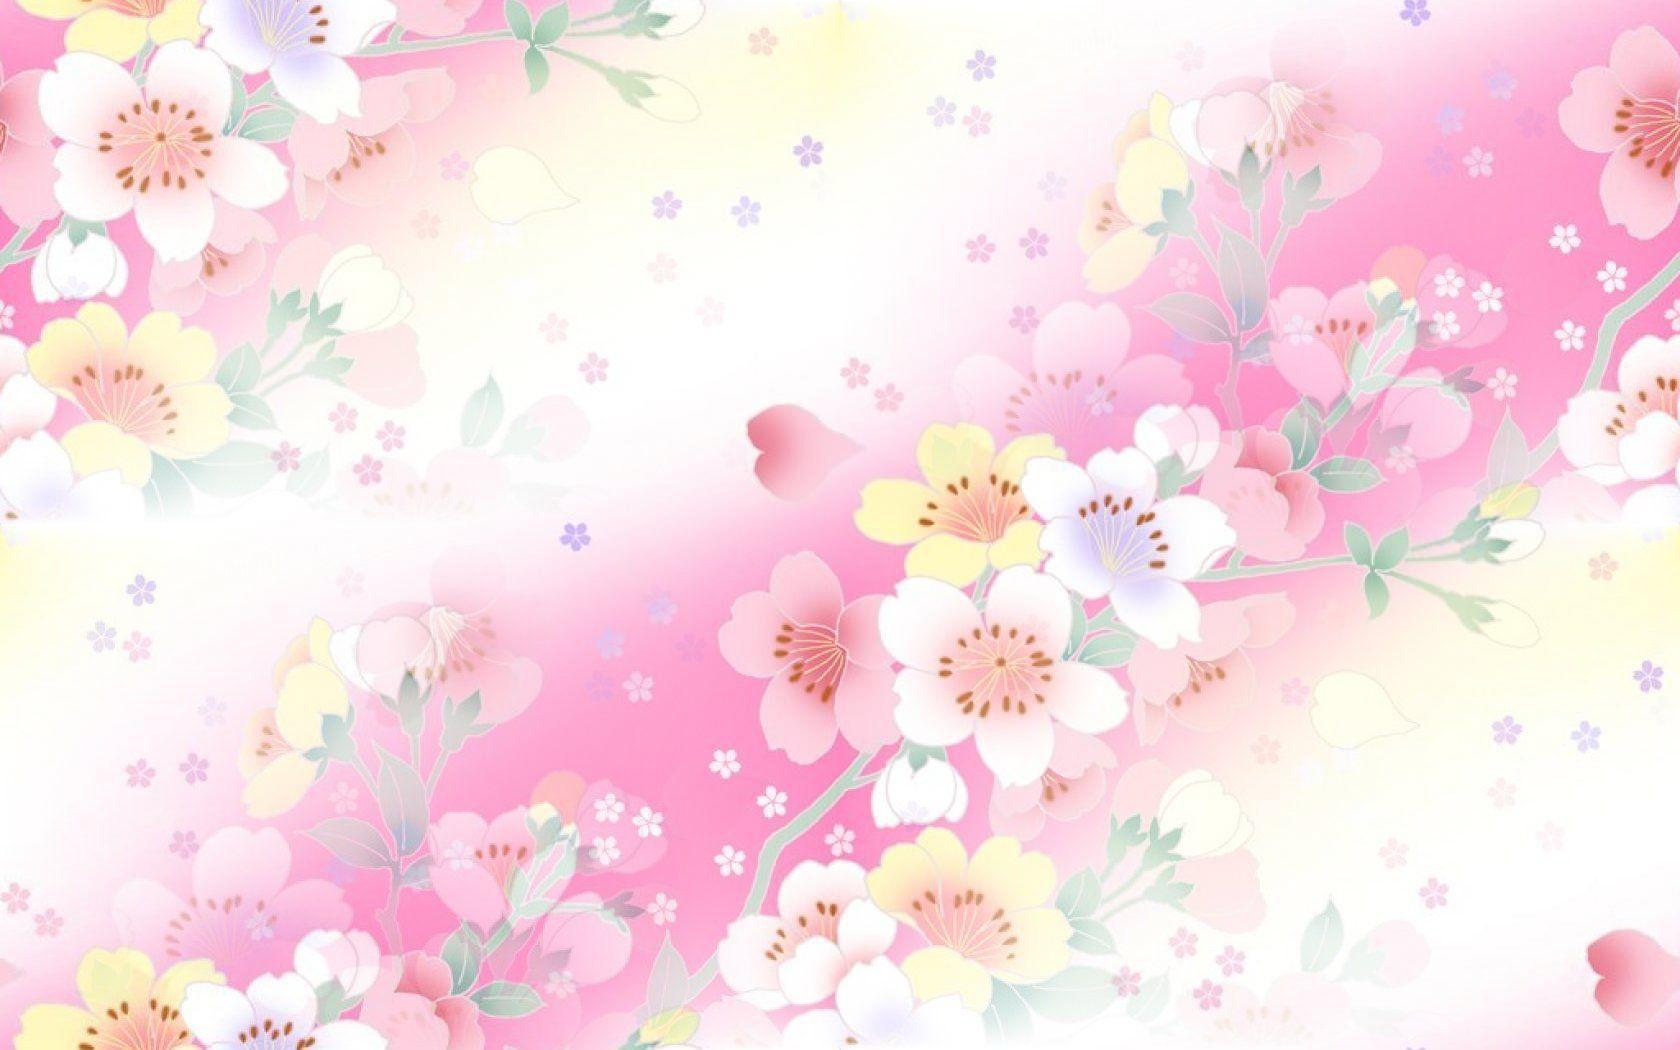 Pretty Backgrounds Image